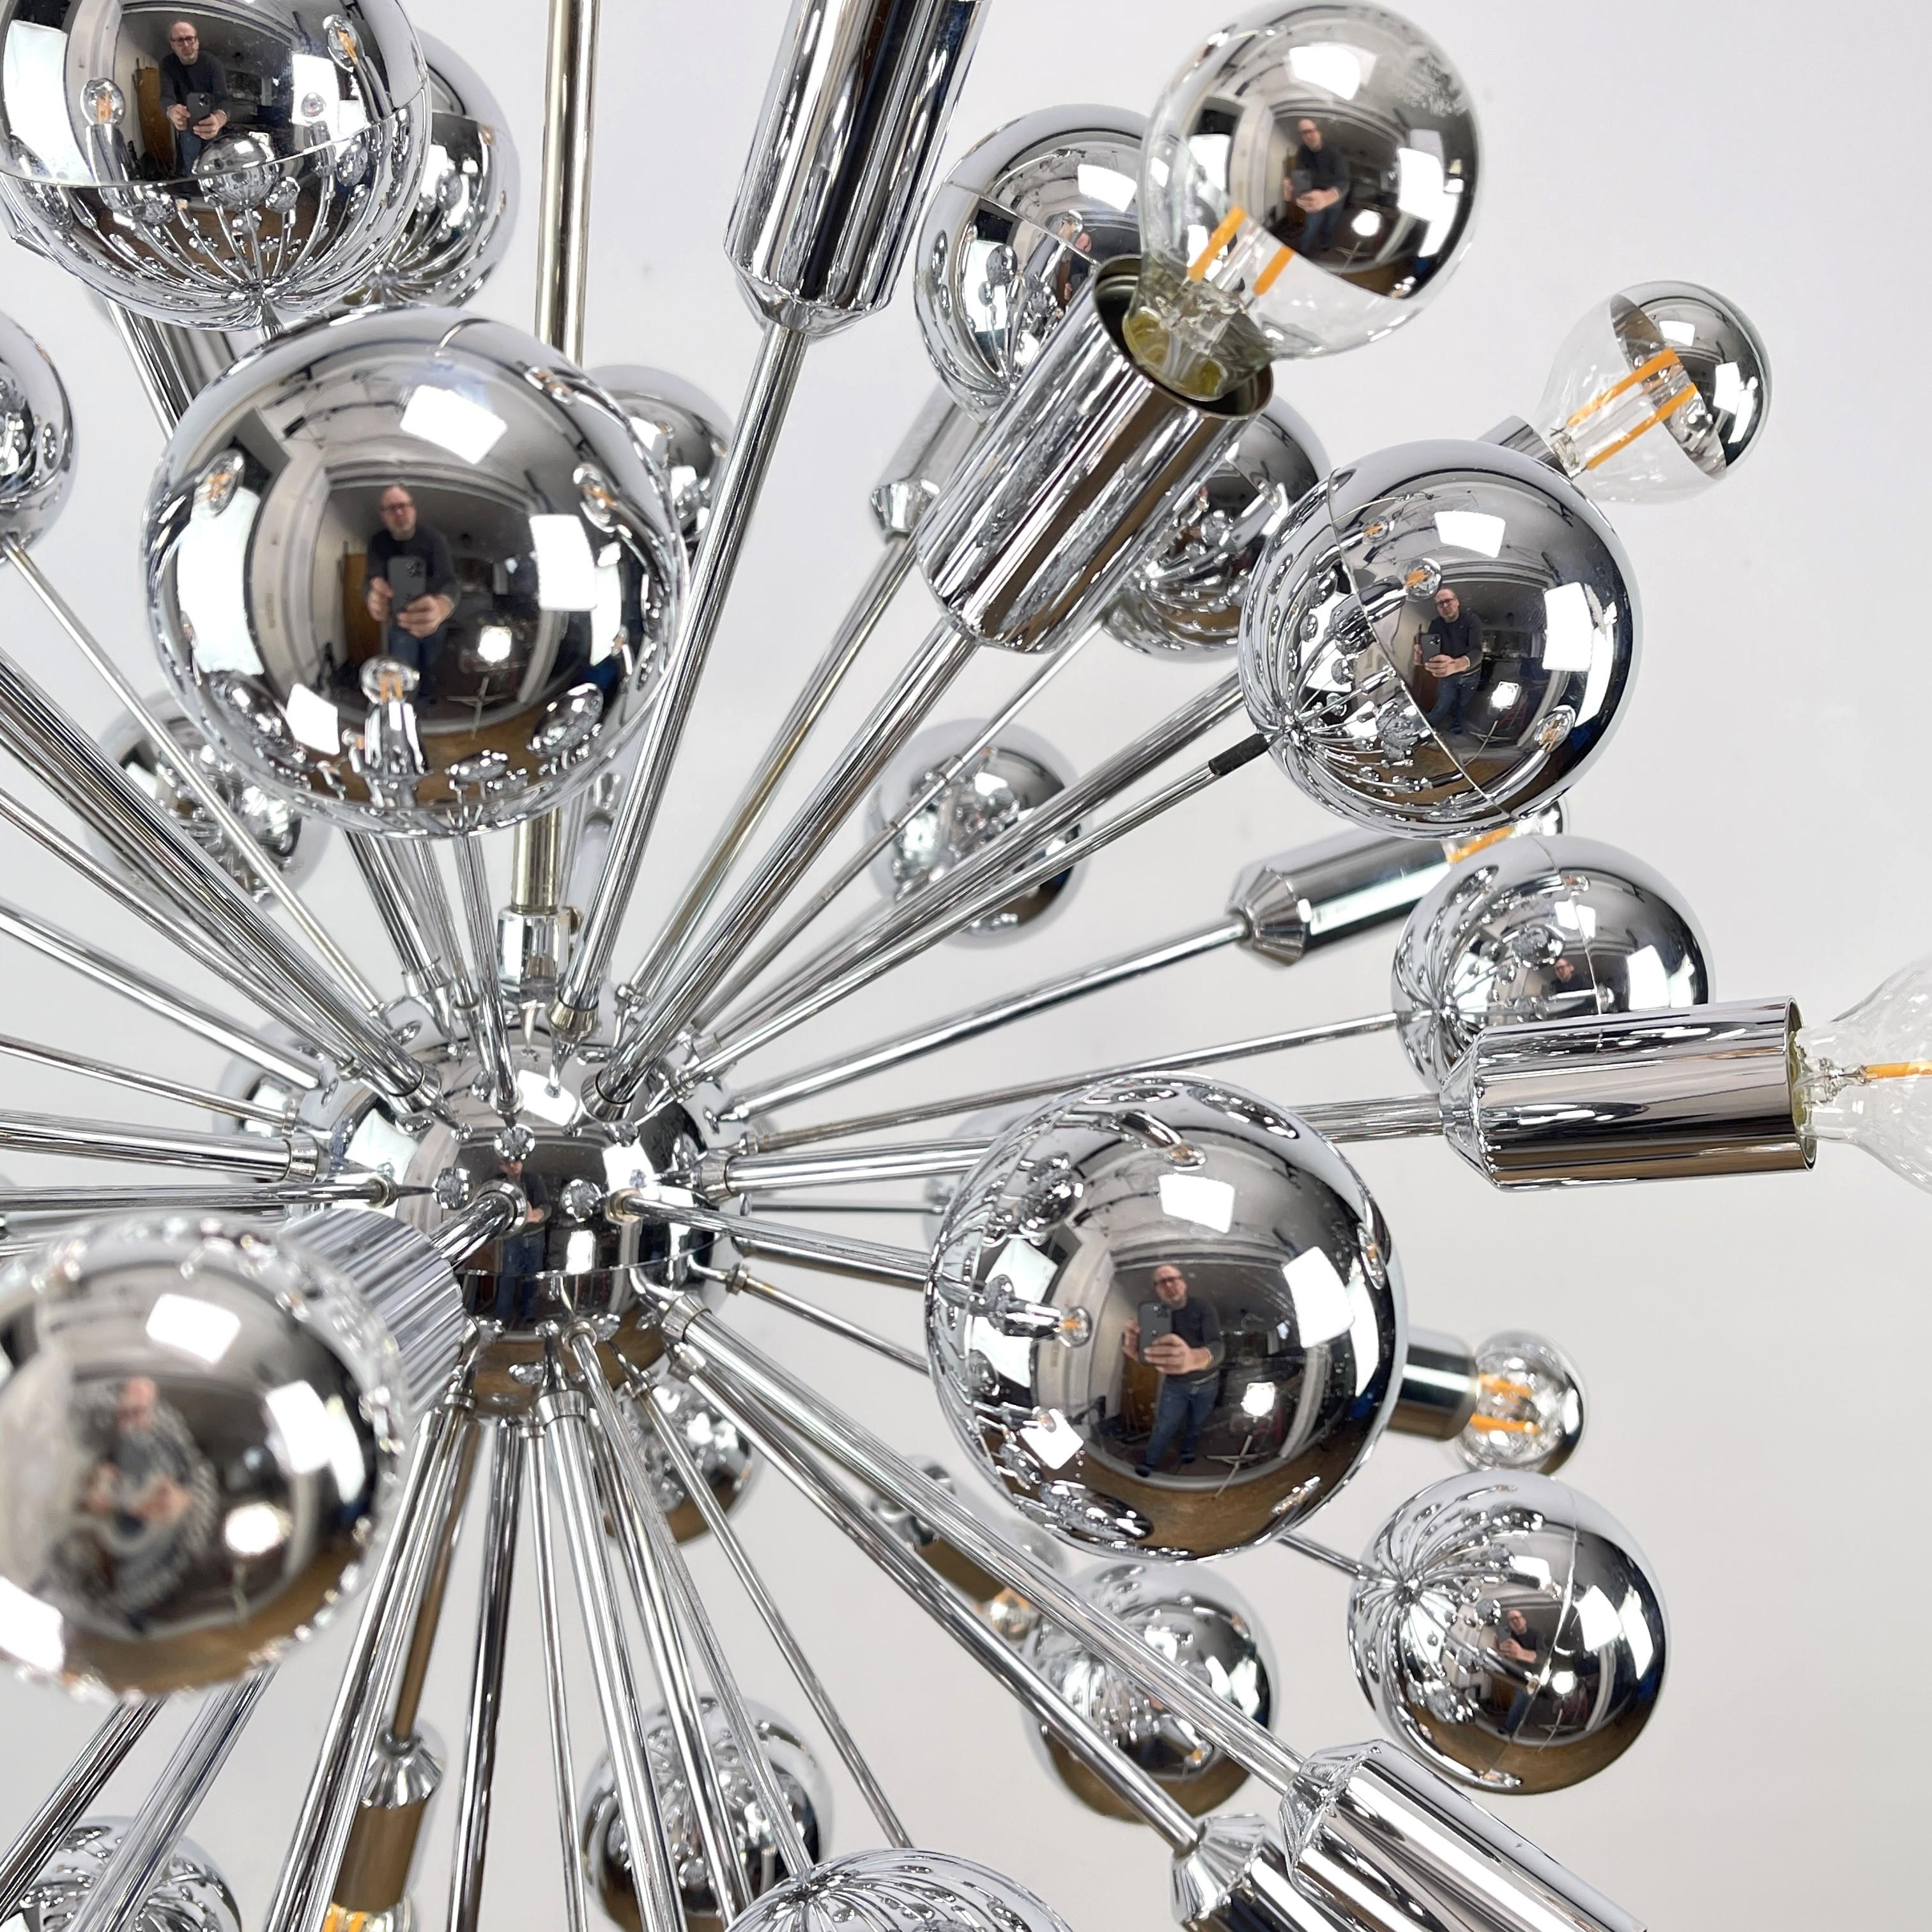 big sputnik ceiling lamp - 1970s

This stylish Cosack Sputnik chrome lamp from the 70s is a timeless design piece that perfectly embodies the charm and elegance of the era. With its striking sputnik design, this lamp is a real eye-catcher that adds